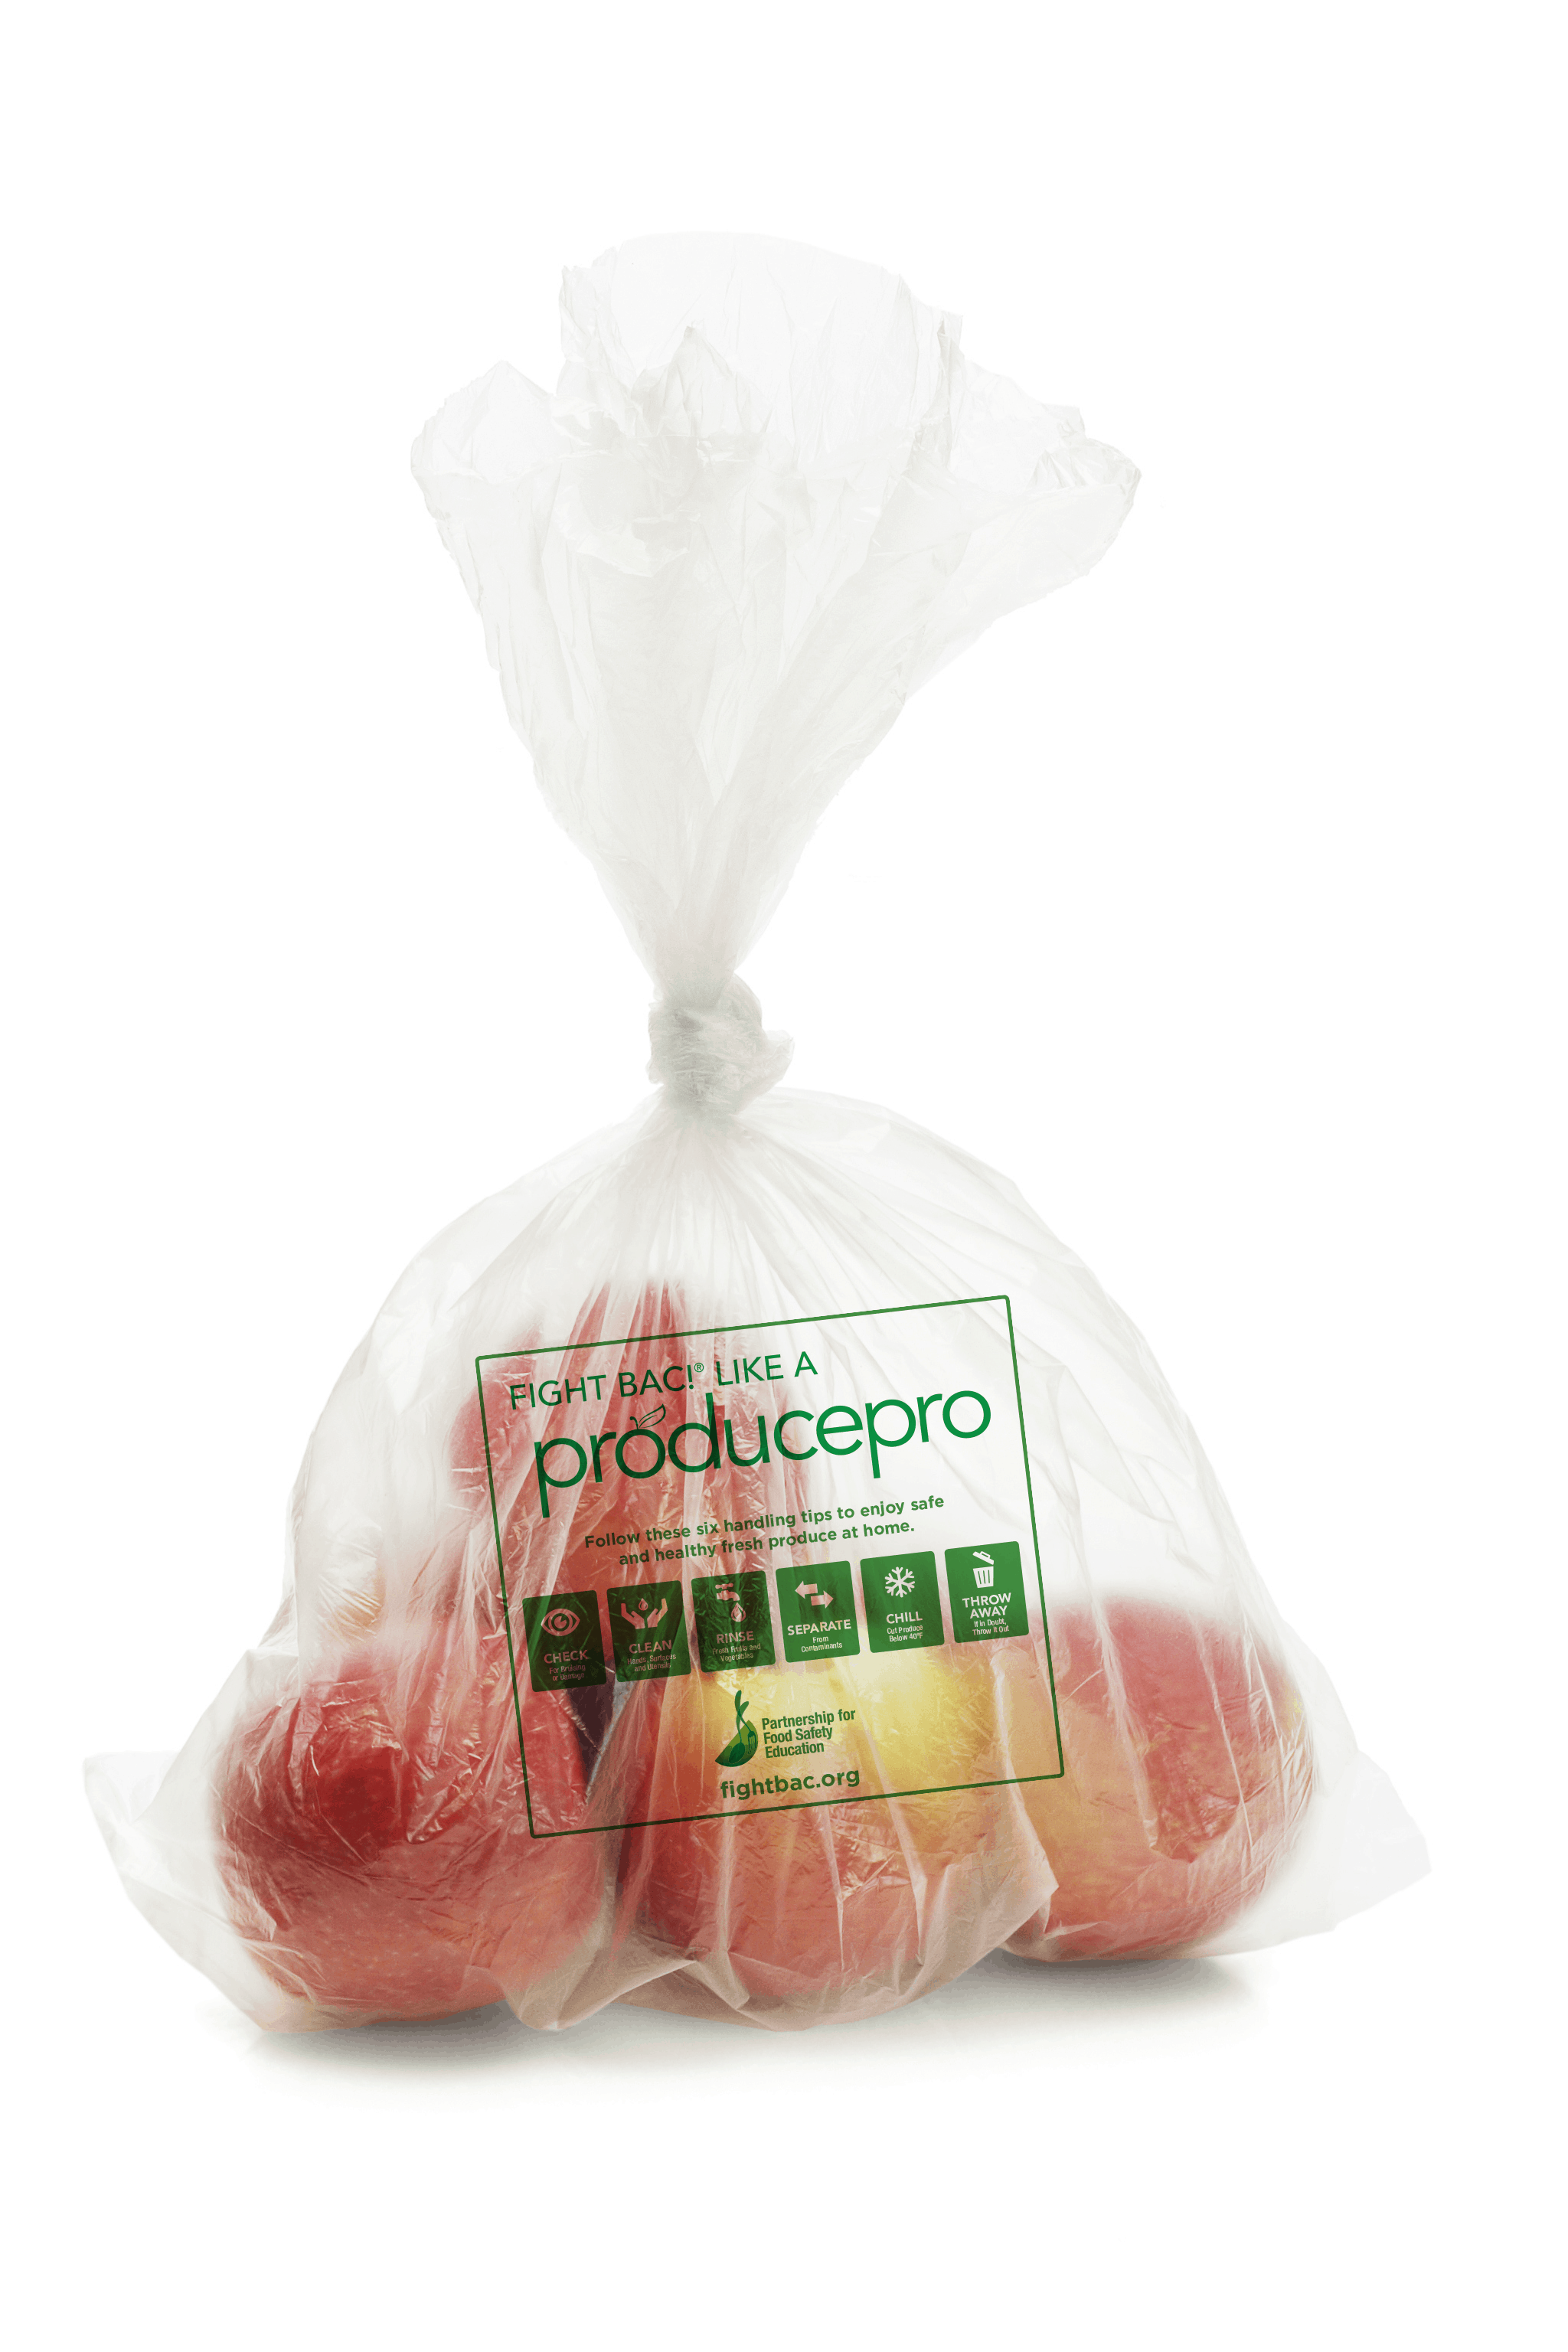 apples in a bag with ProducePros logo on bag